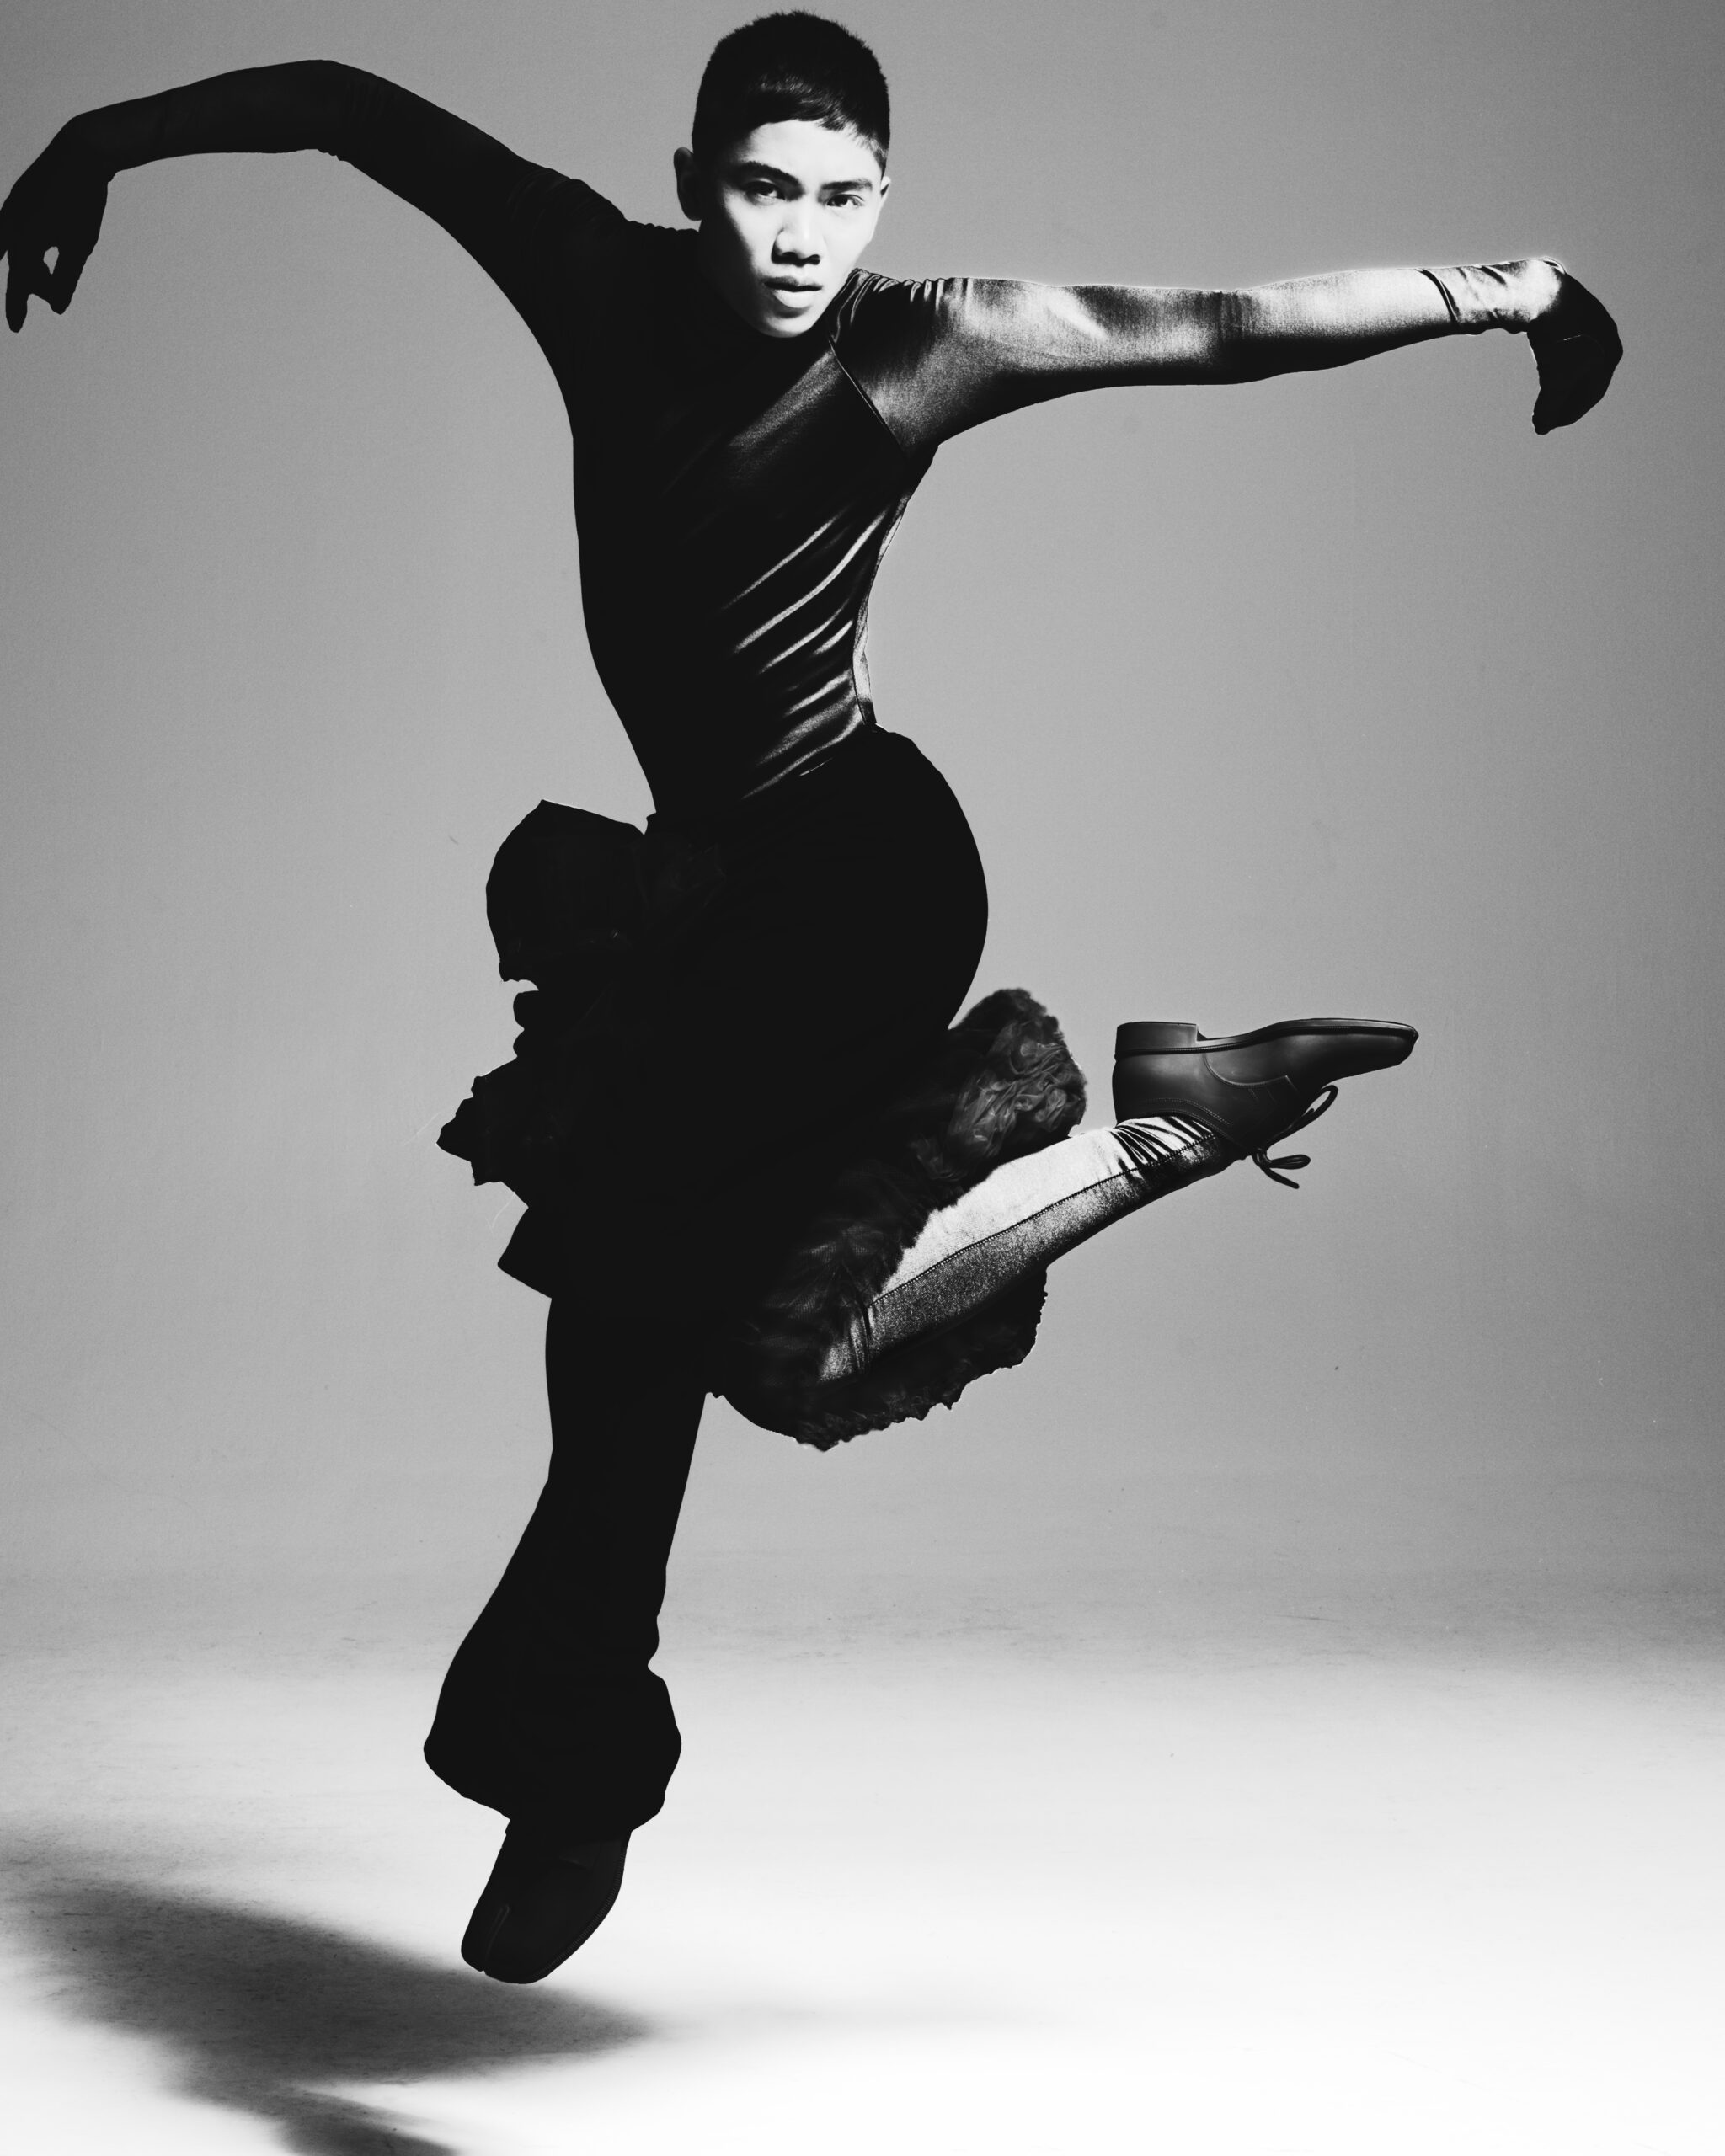 Posh in an artistic black and white photo, mid-dance with arms outstretched facing the camera.